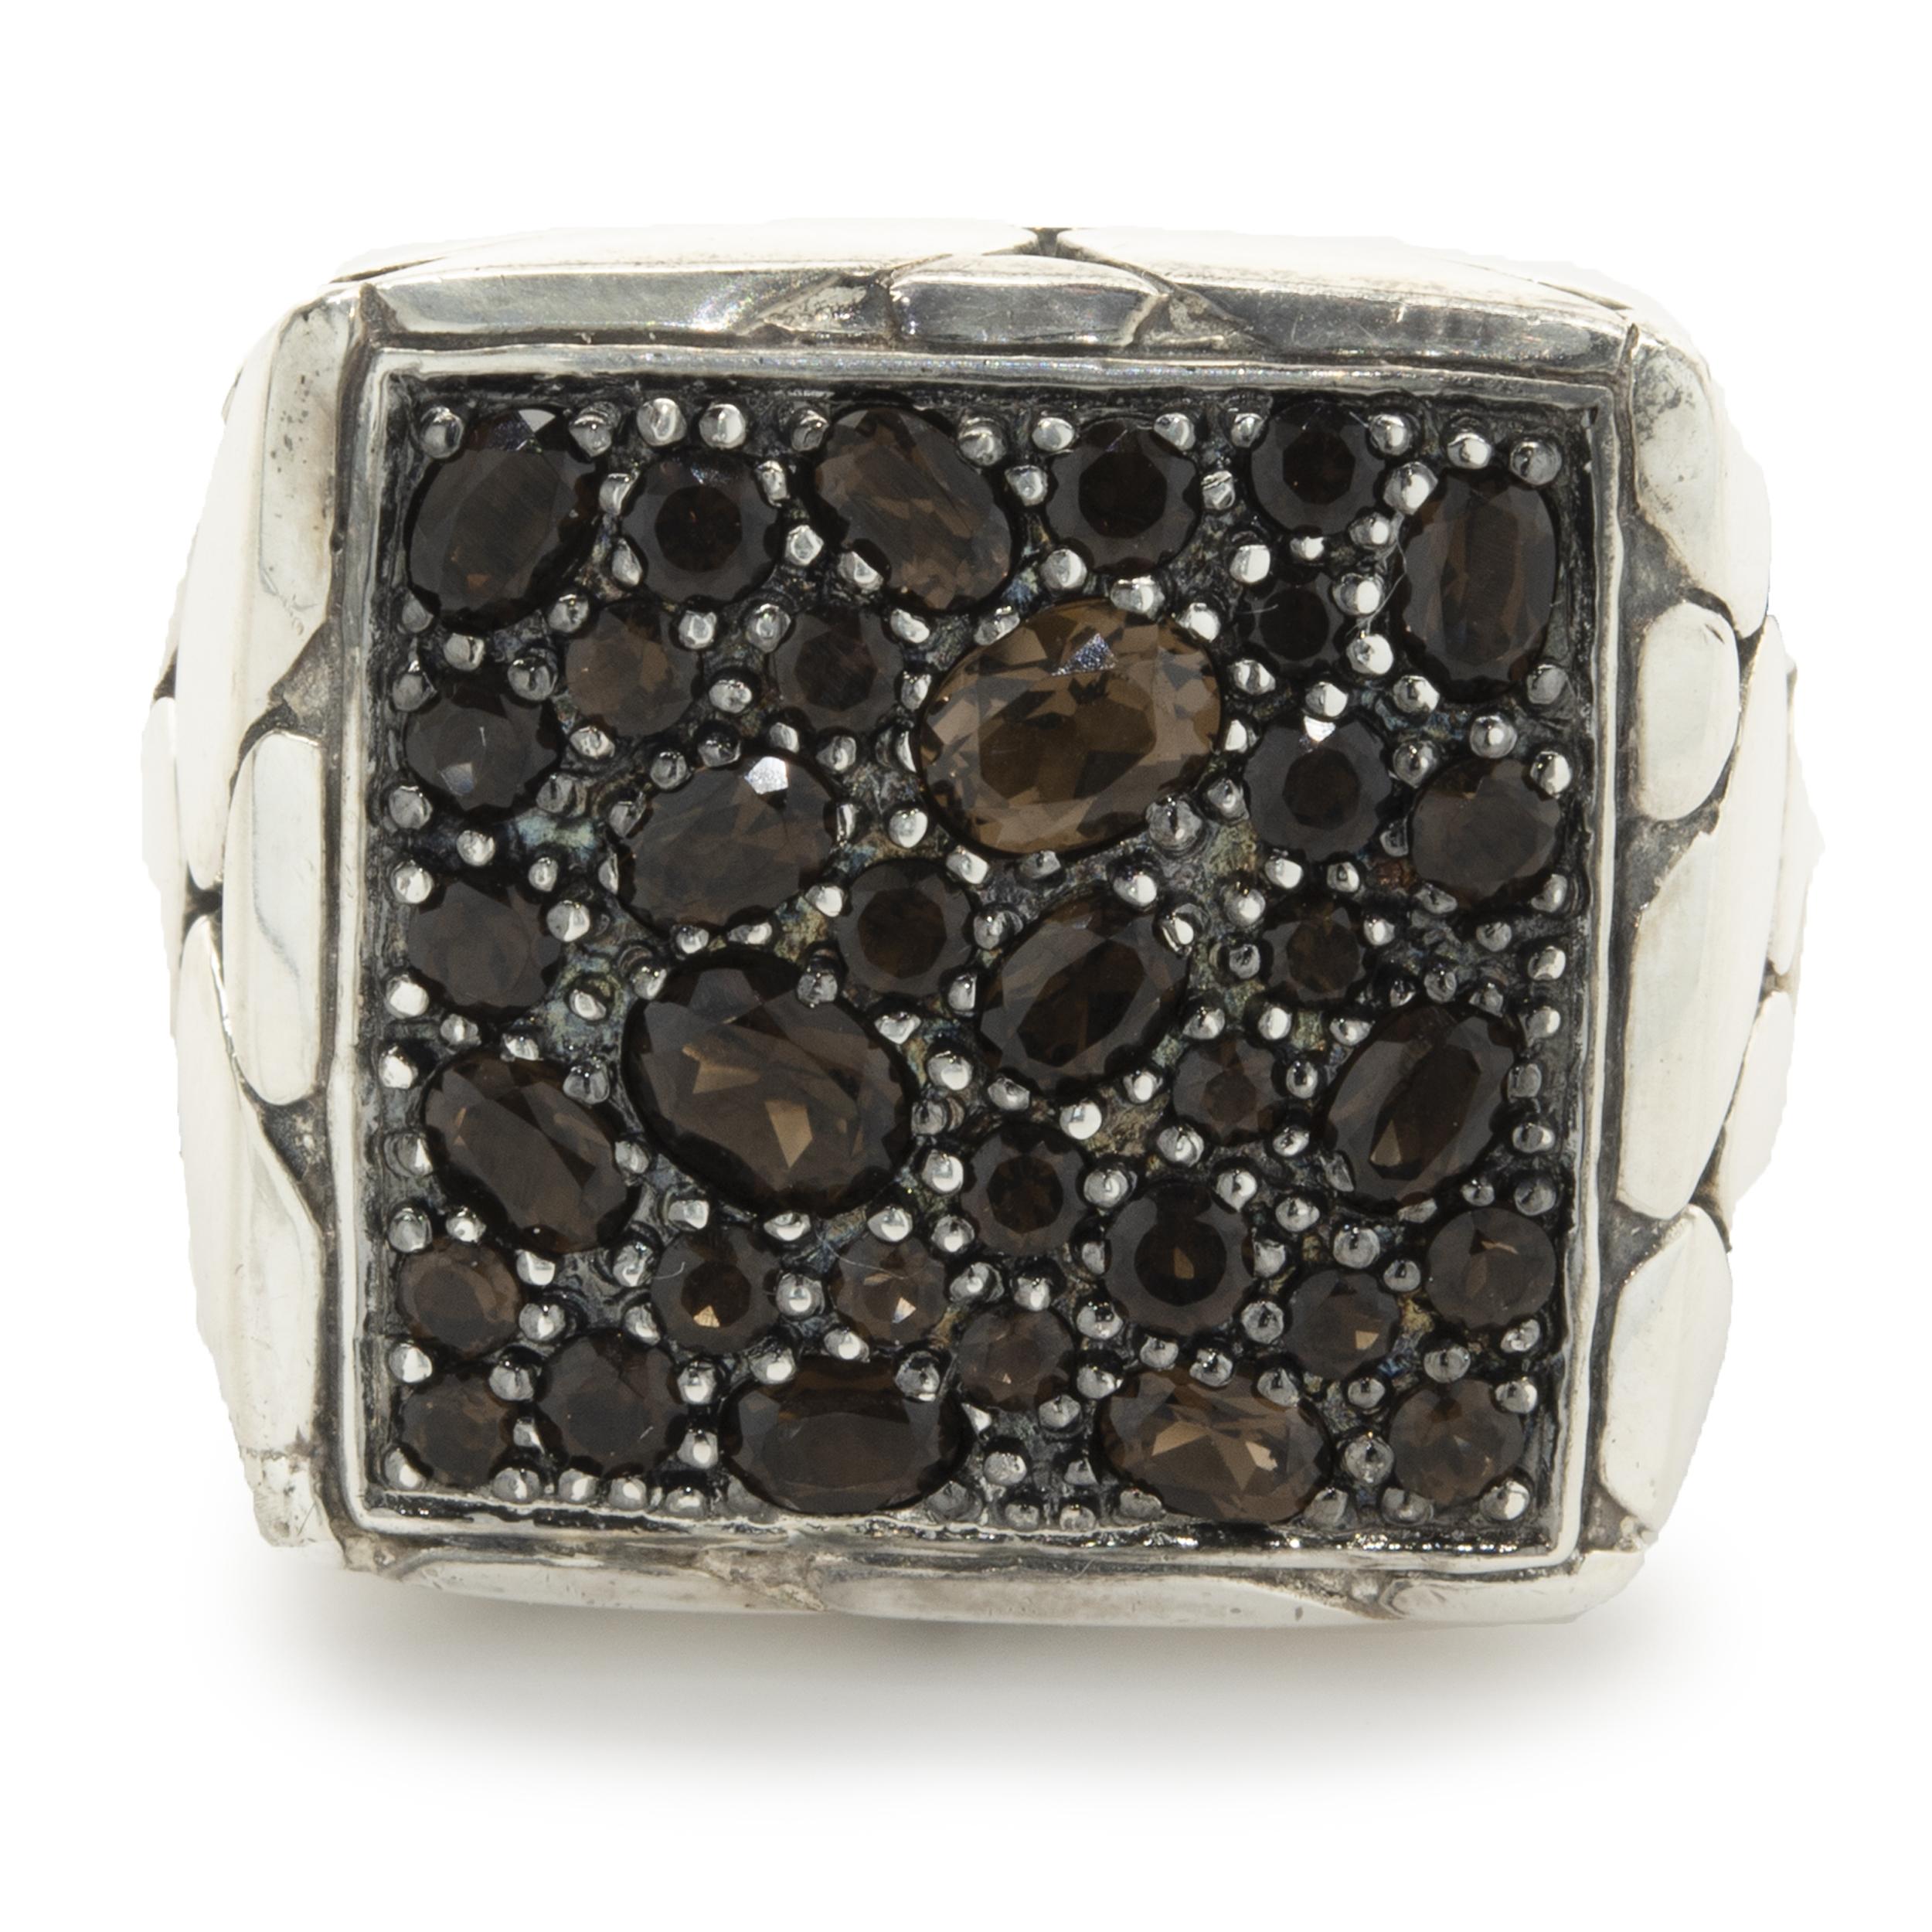 Designer: John Hardy
Material: Sterling Silver
Dimensions: ring measures 18.50mm
Weight: 17.53 grams